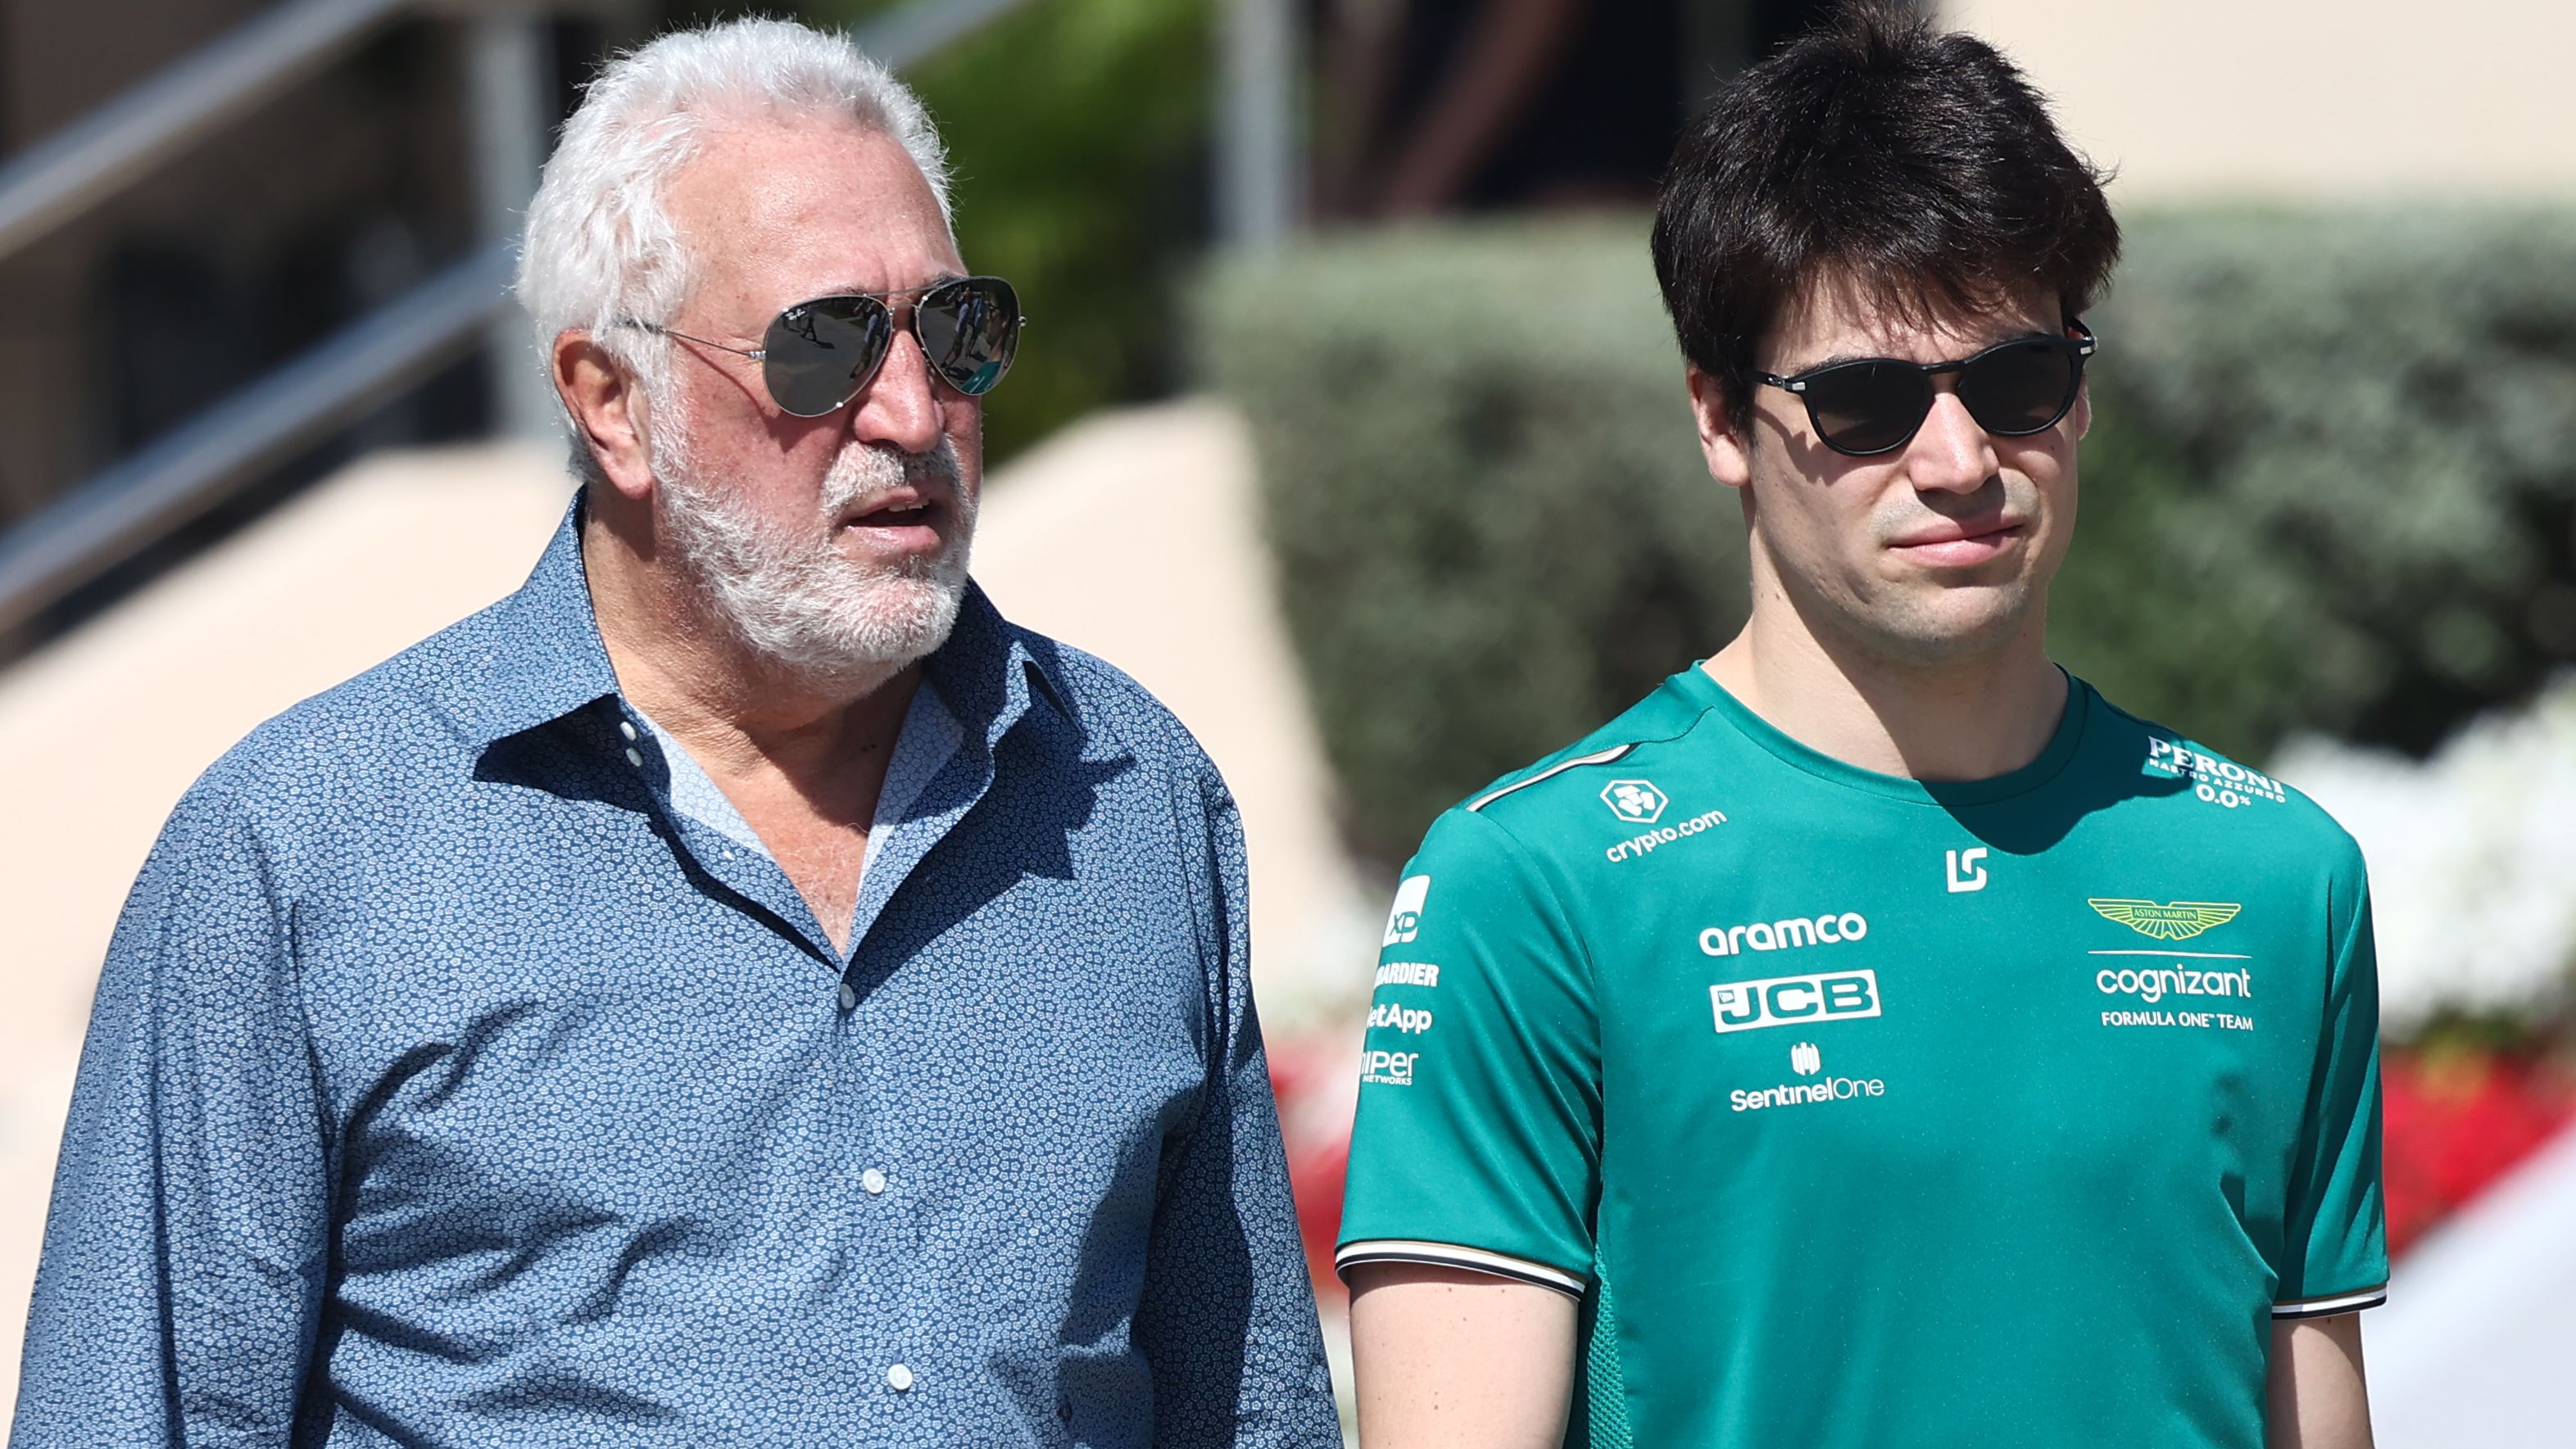 Lawrence Stroll and Lance Stroll of Aston Martin ahead of the 2023 Bahrain Grand Prix.